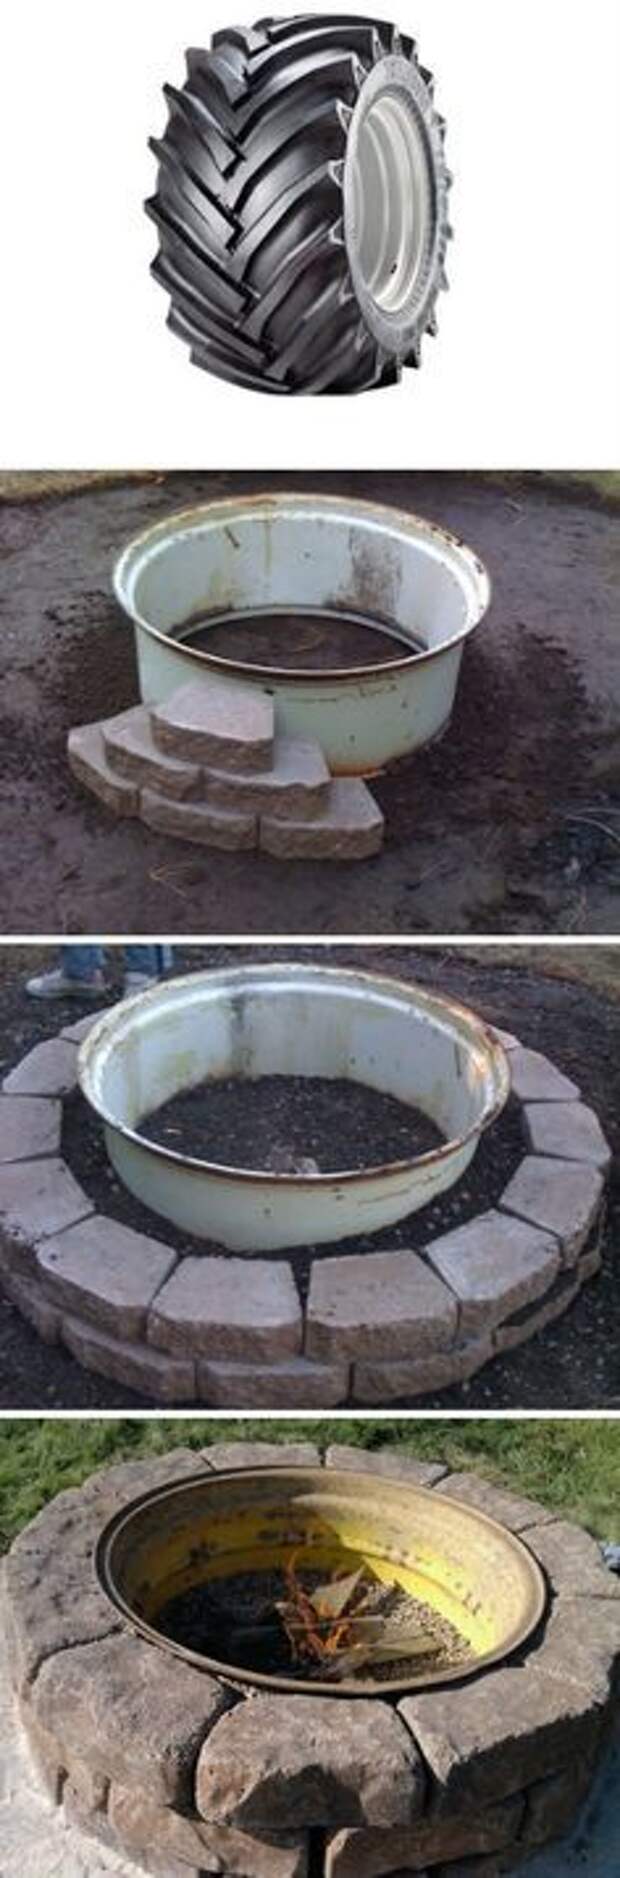 Tractor Wheel Fire Pit   Gotta look on Craigslist for a wheel!!: 